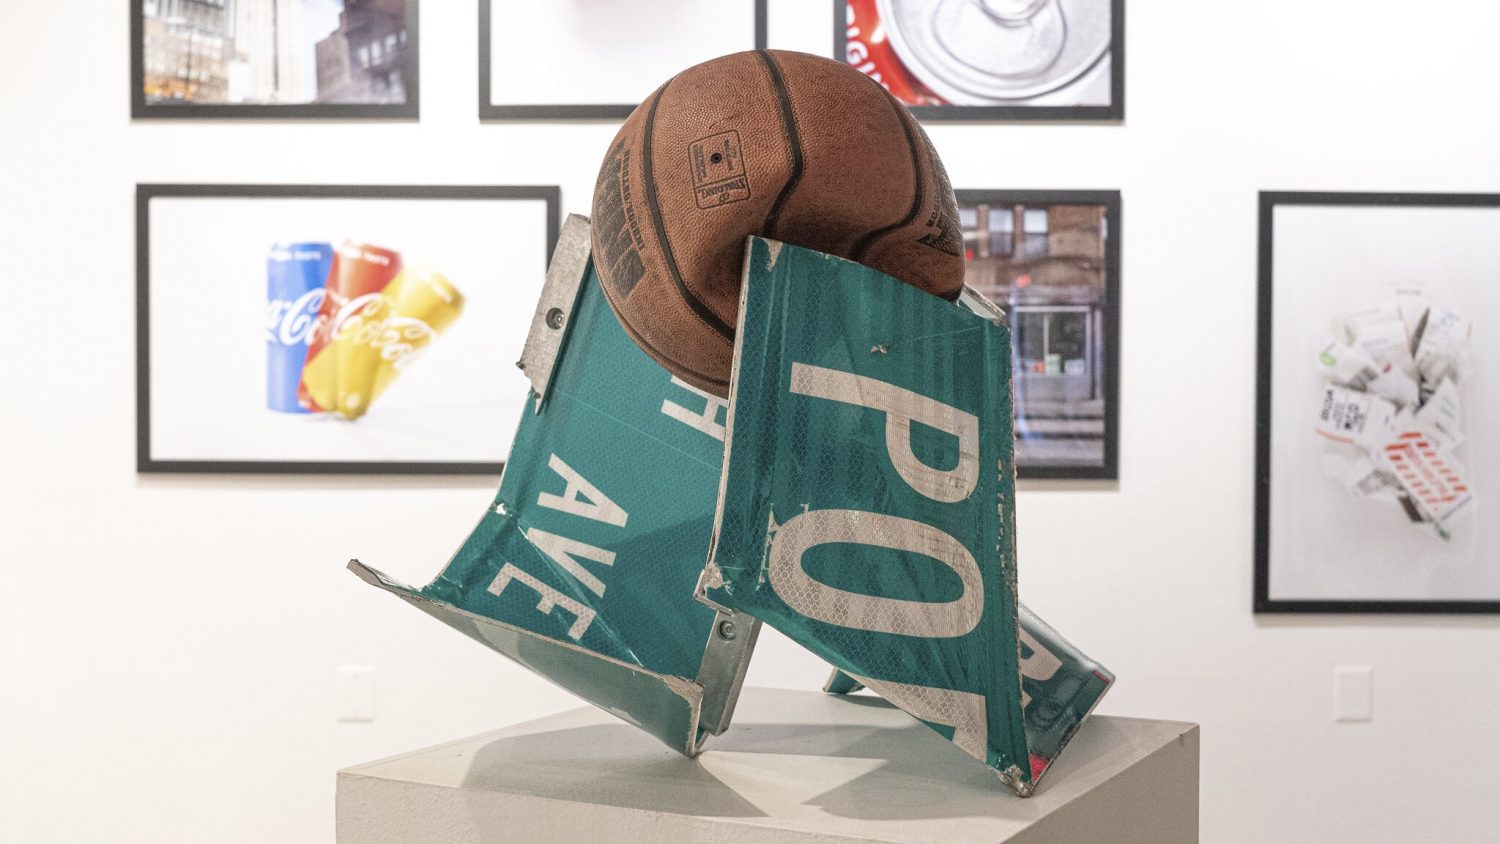 DeShawn Oravetz, Streetball, 2019. Mixed media sculpture, 19 x 27 x 5 x 28 inches. Courtesy of the artist